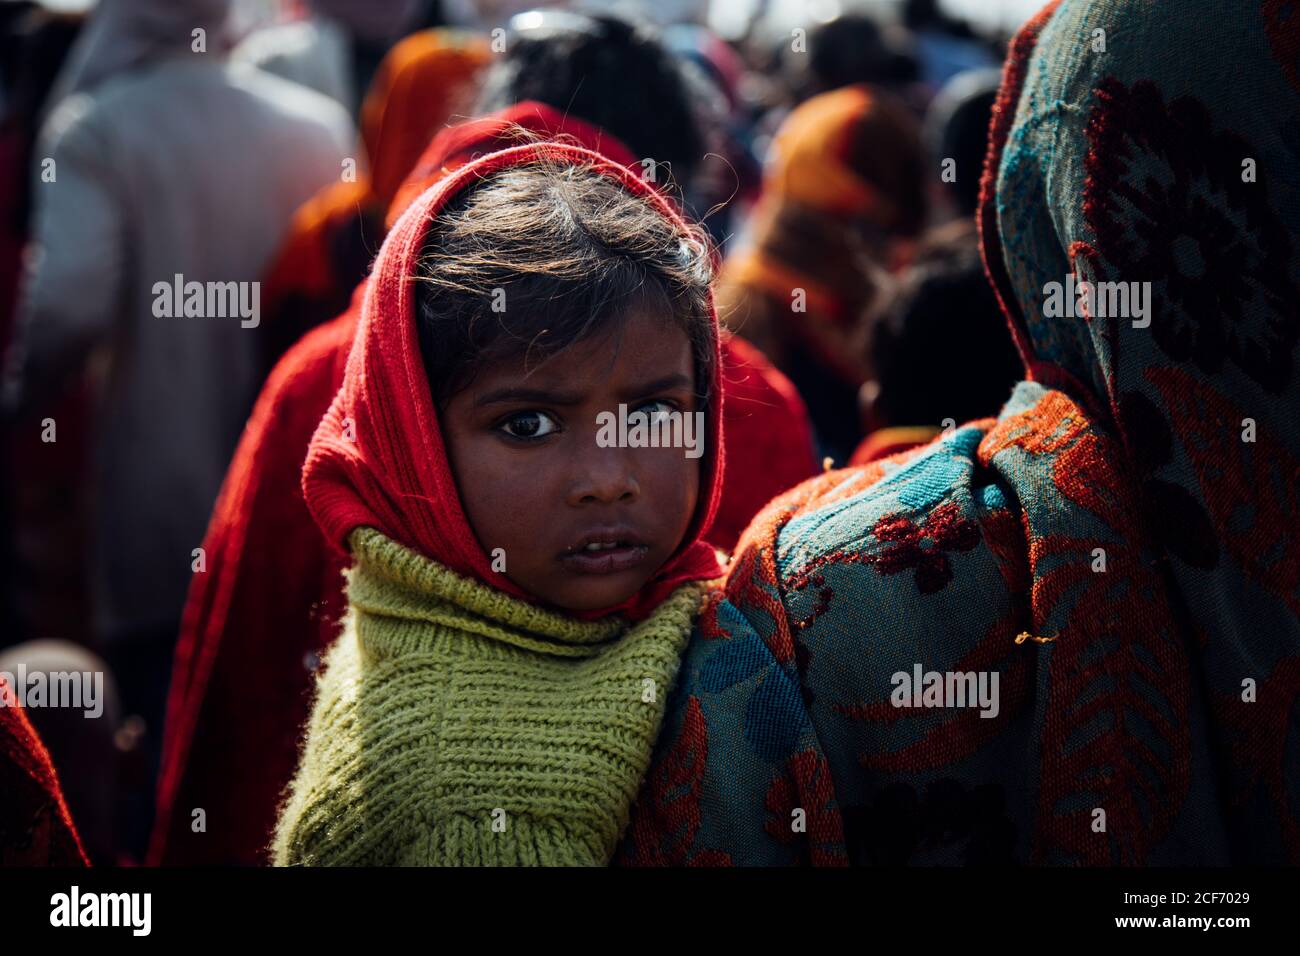 Allahabad city, India - FEBRUARY, 2018: Little girl in red headscarf and green knitted sweater sitting in arms of crop woman walking on street in crowd of pilgrims during Prayag Kumbh Mela Festival Stock Photo